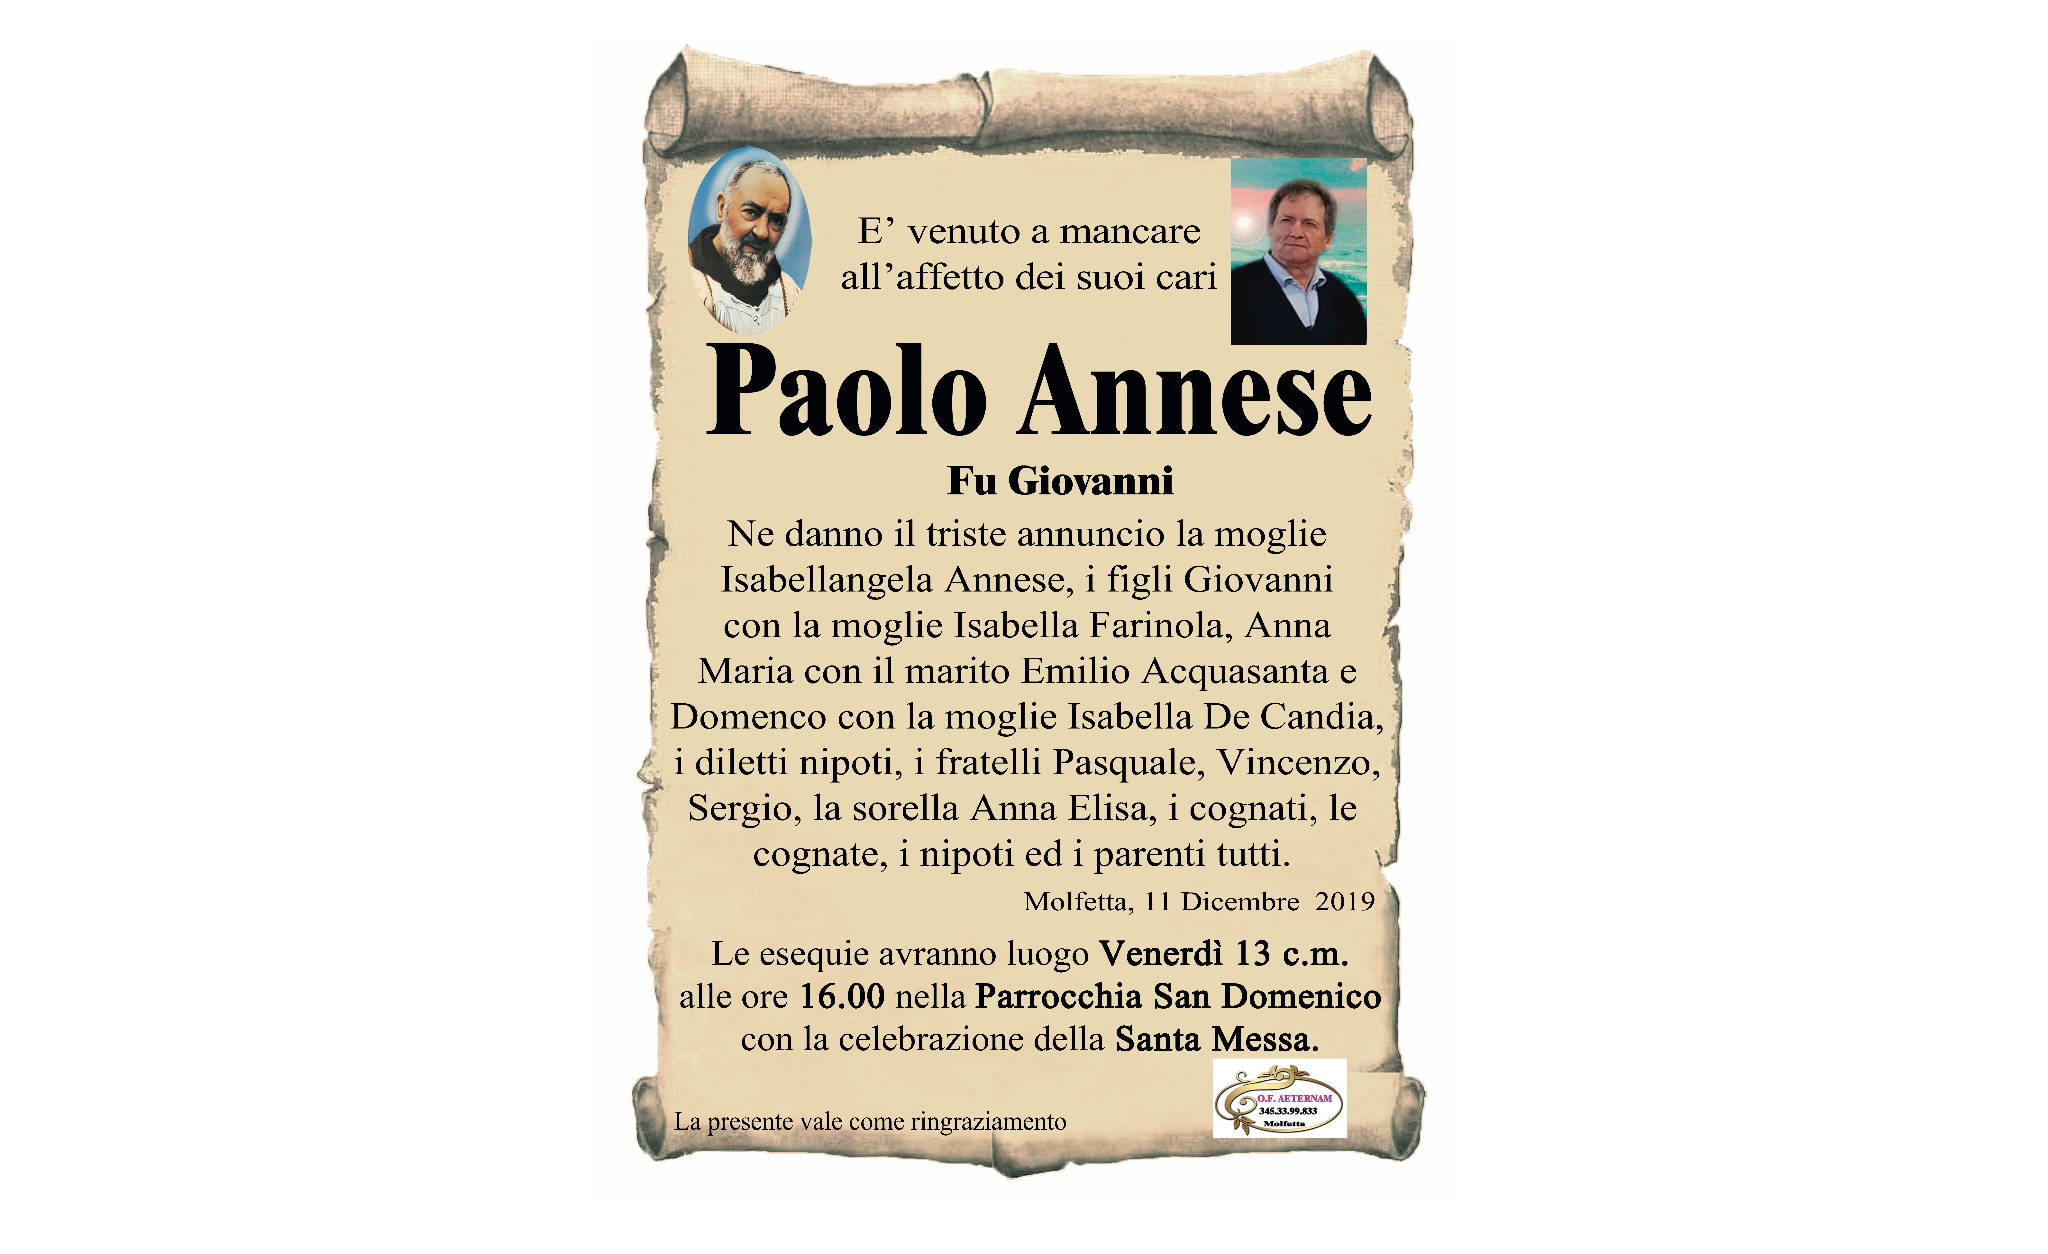 Paolo Annese